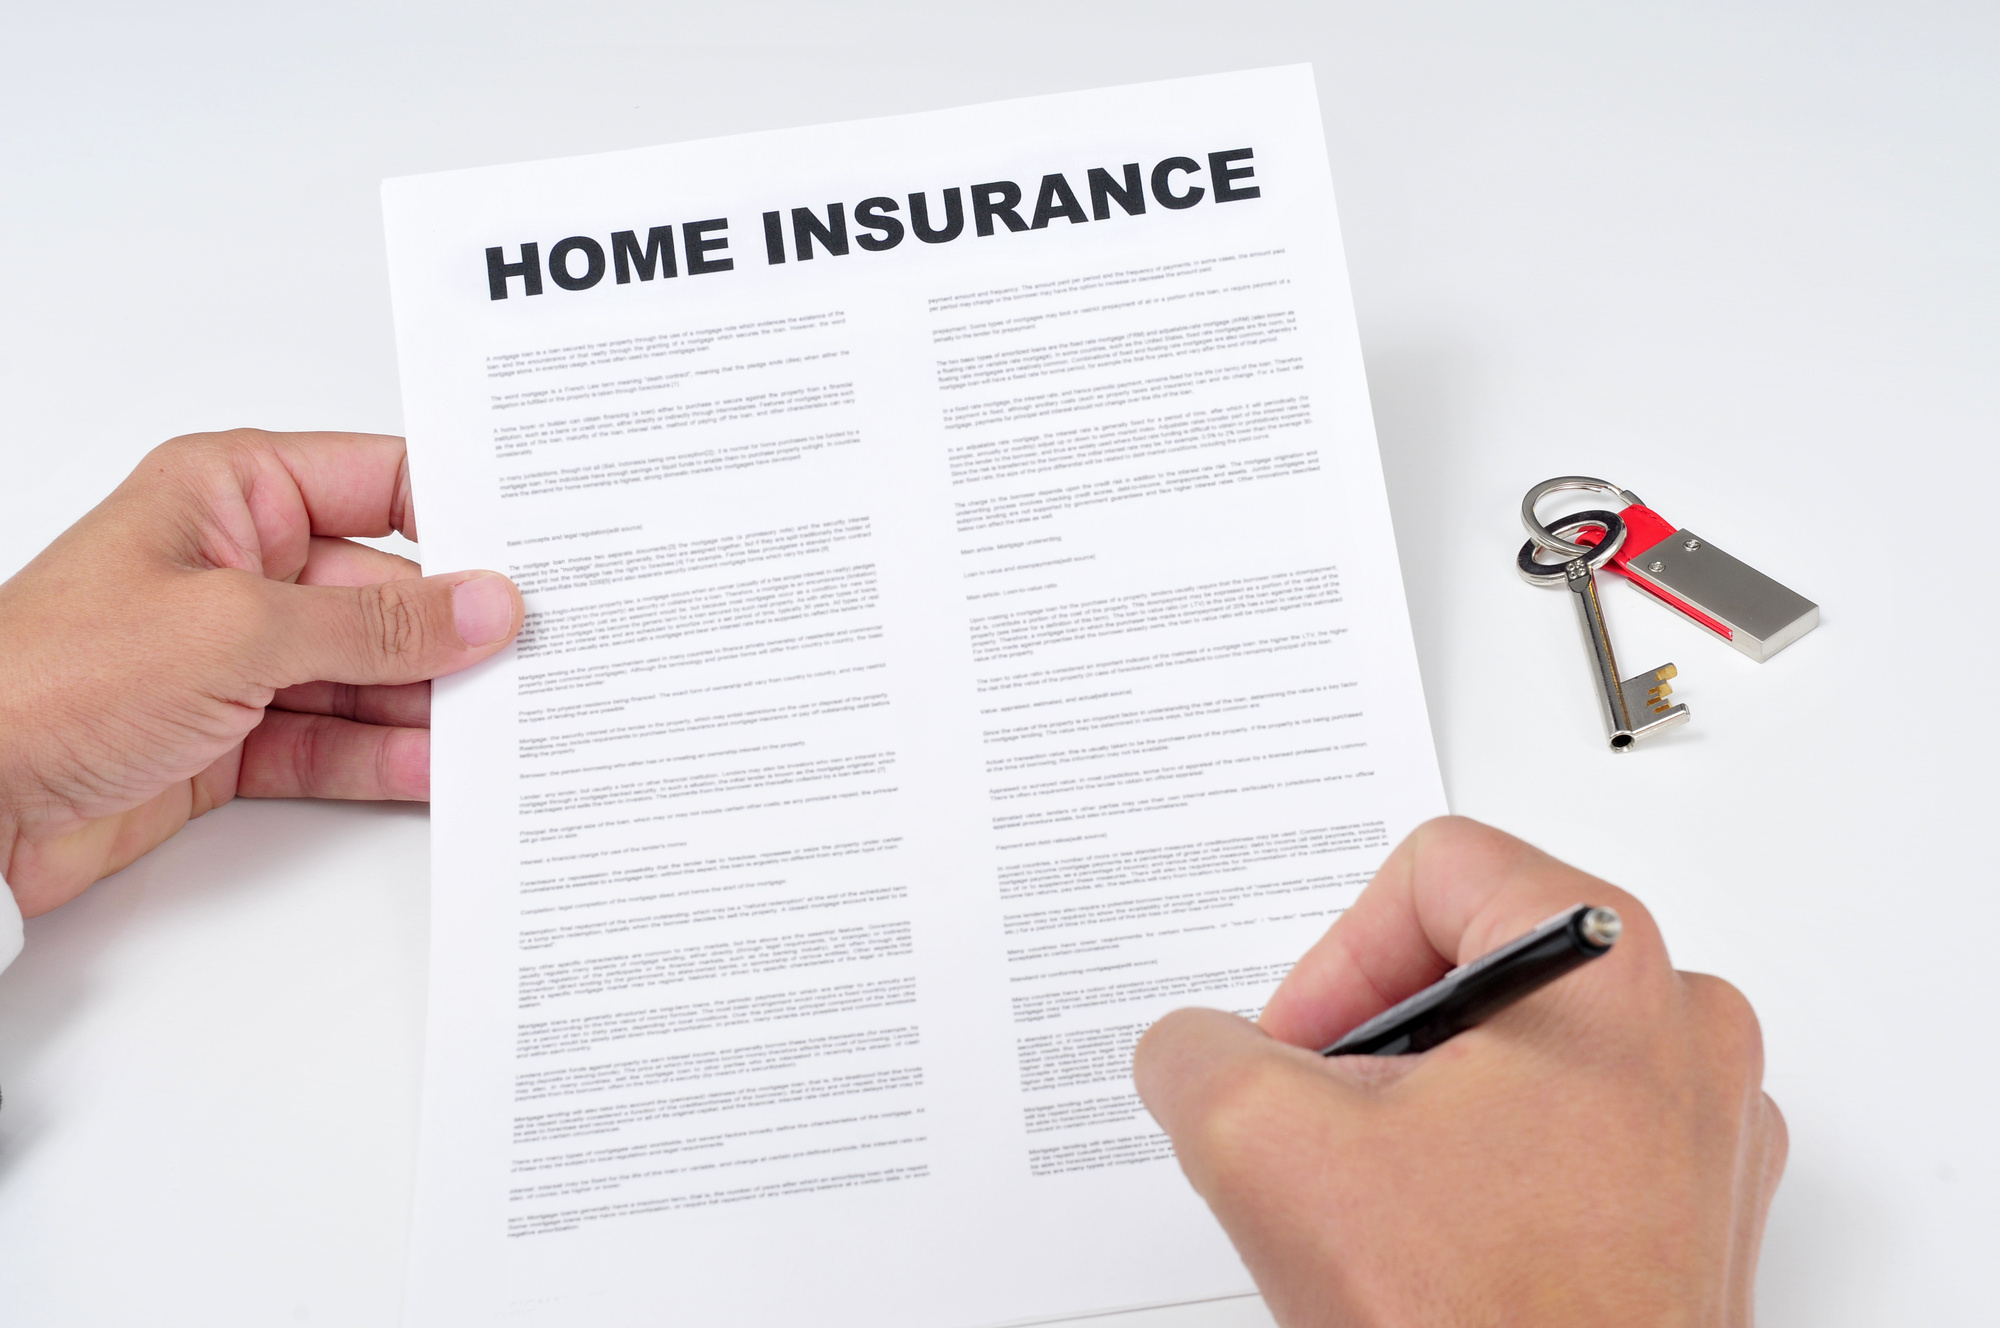 Homeowners Insurance Claims